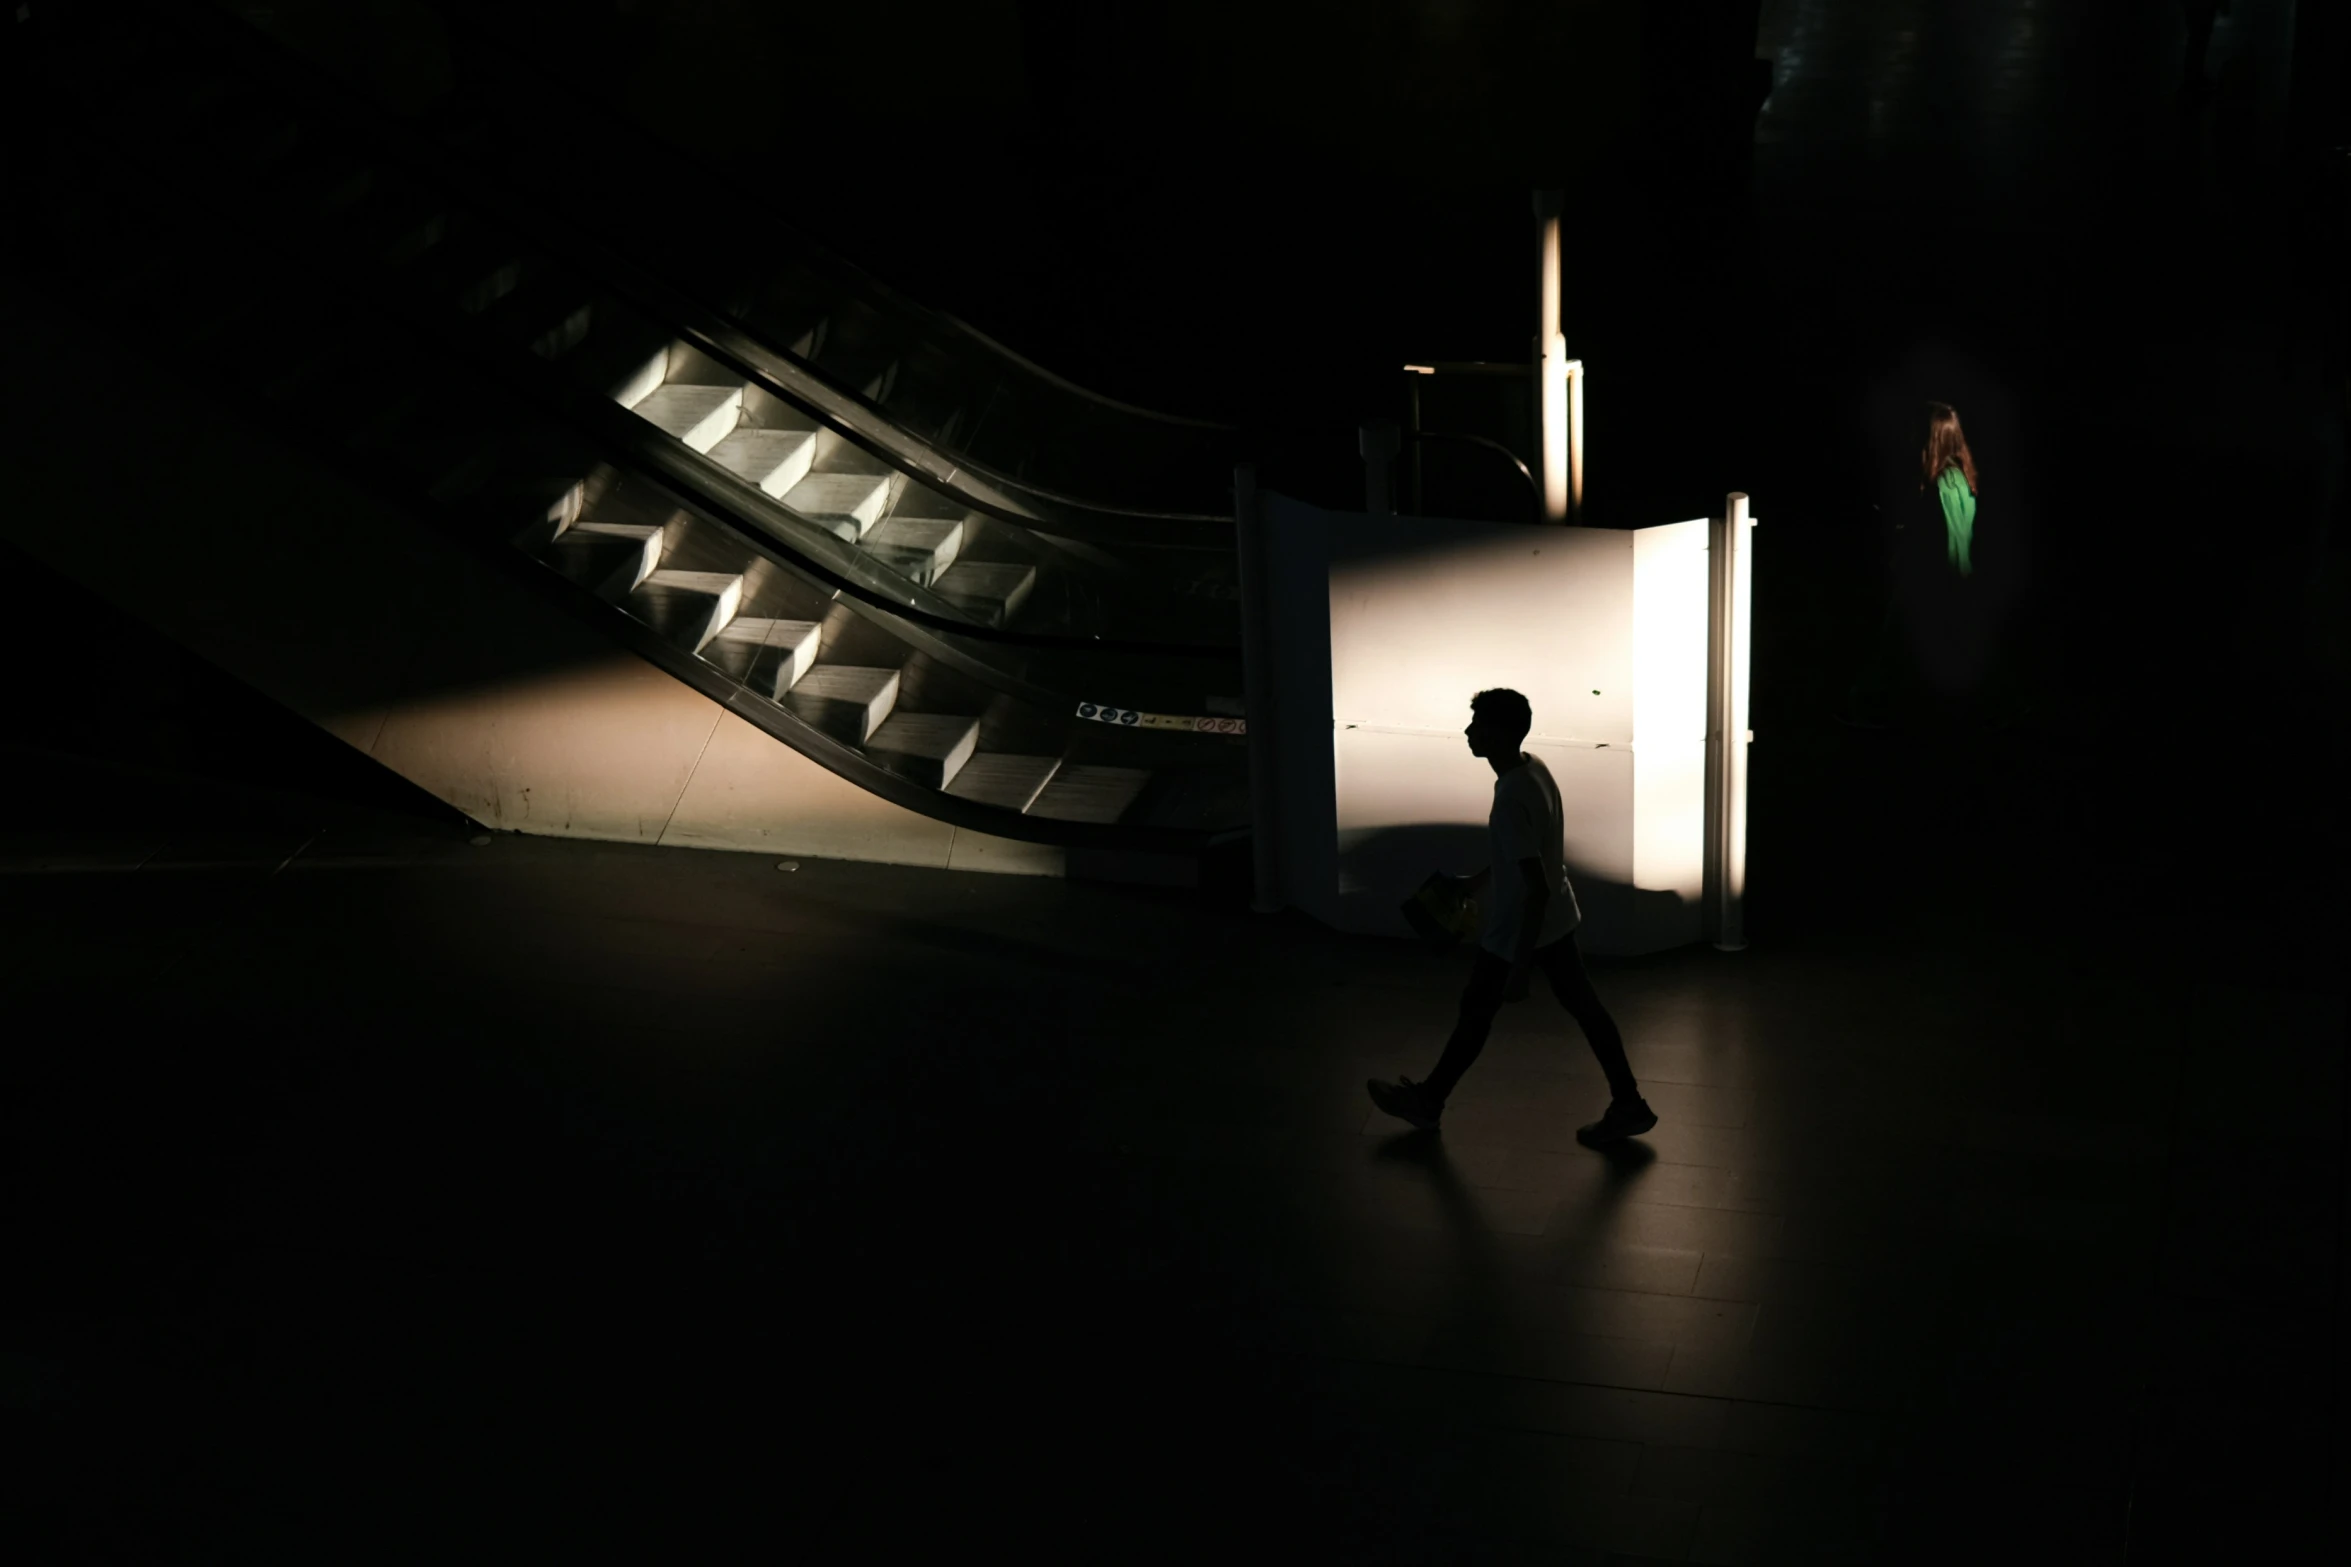 silhouette of a man walking down the street under the light from the stair